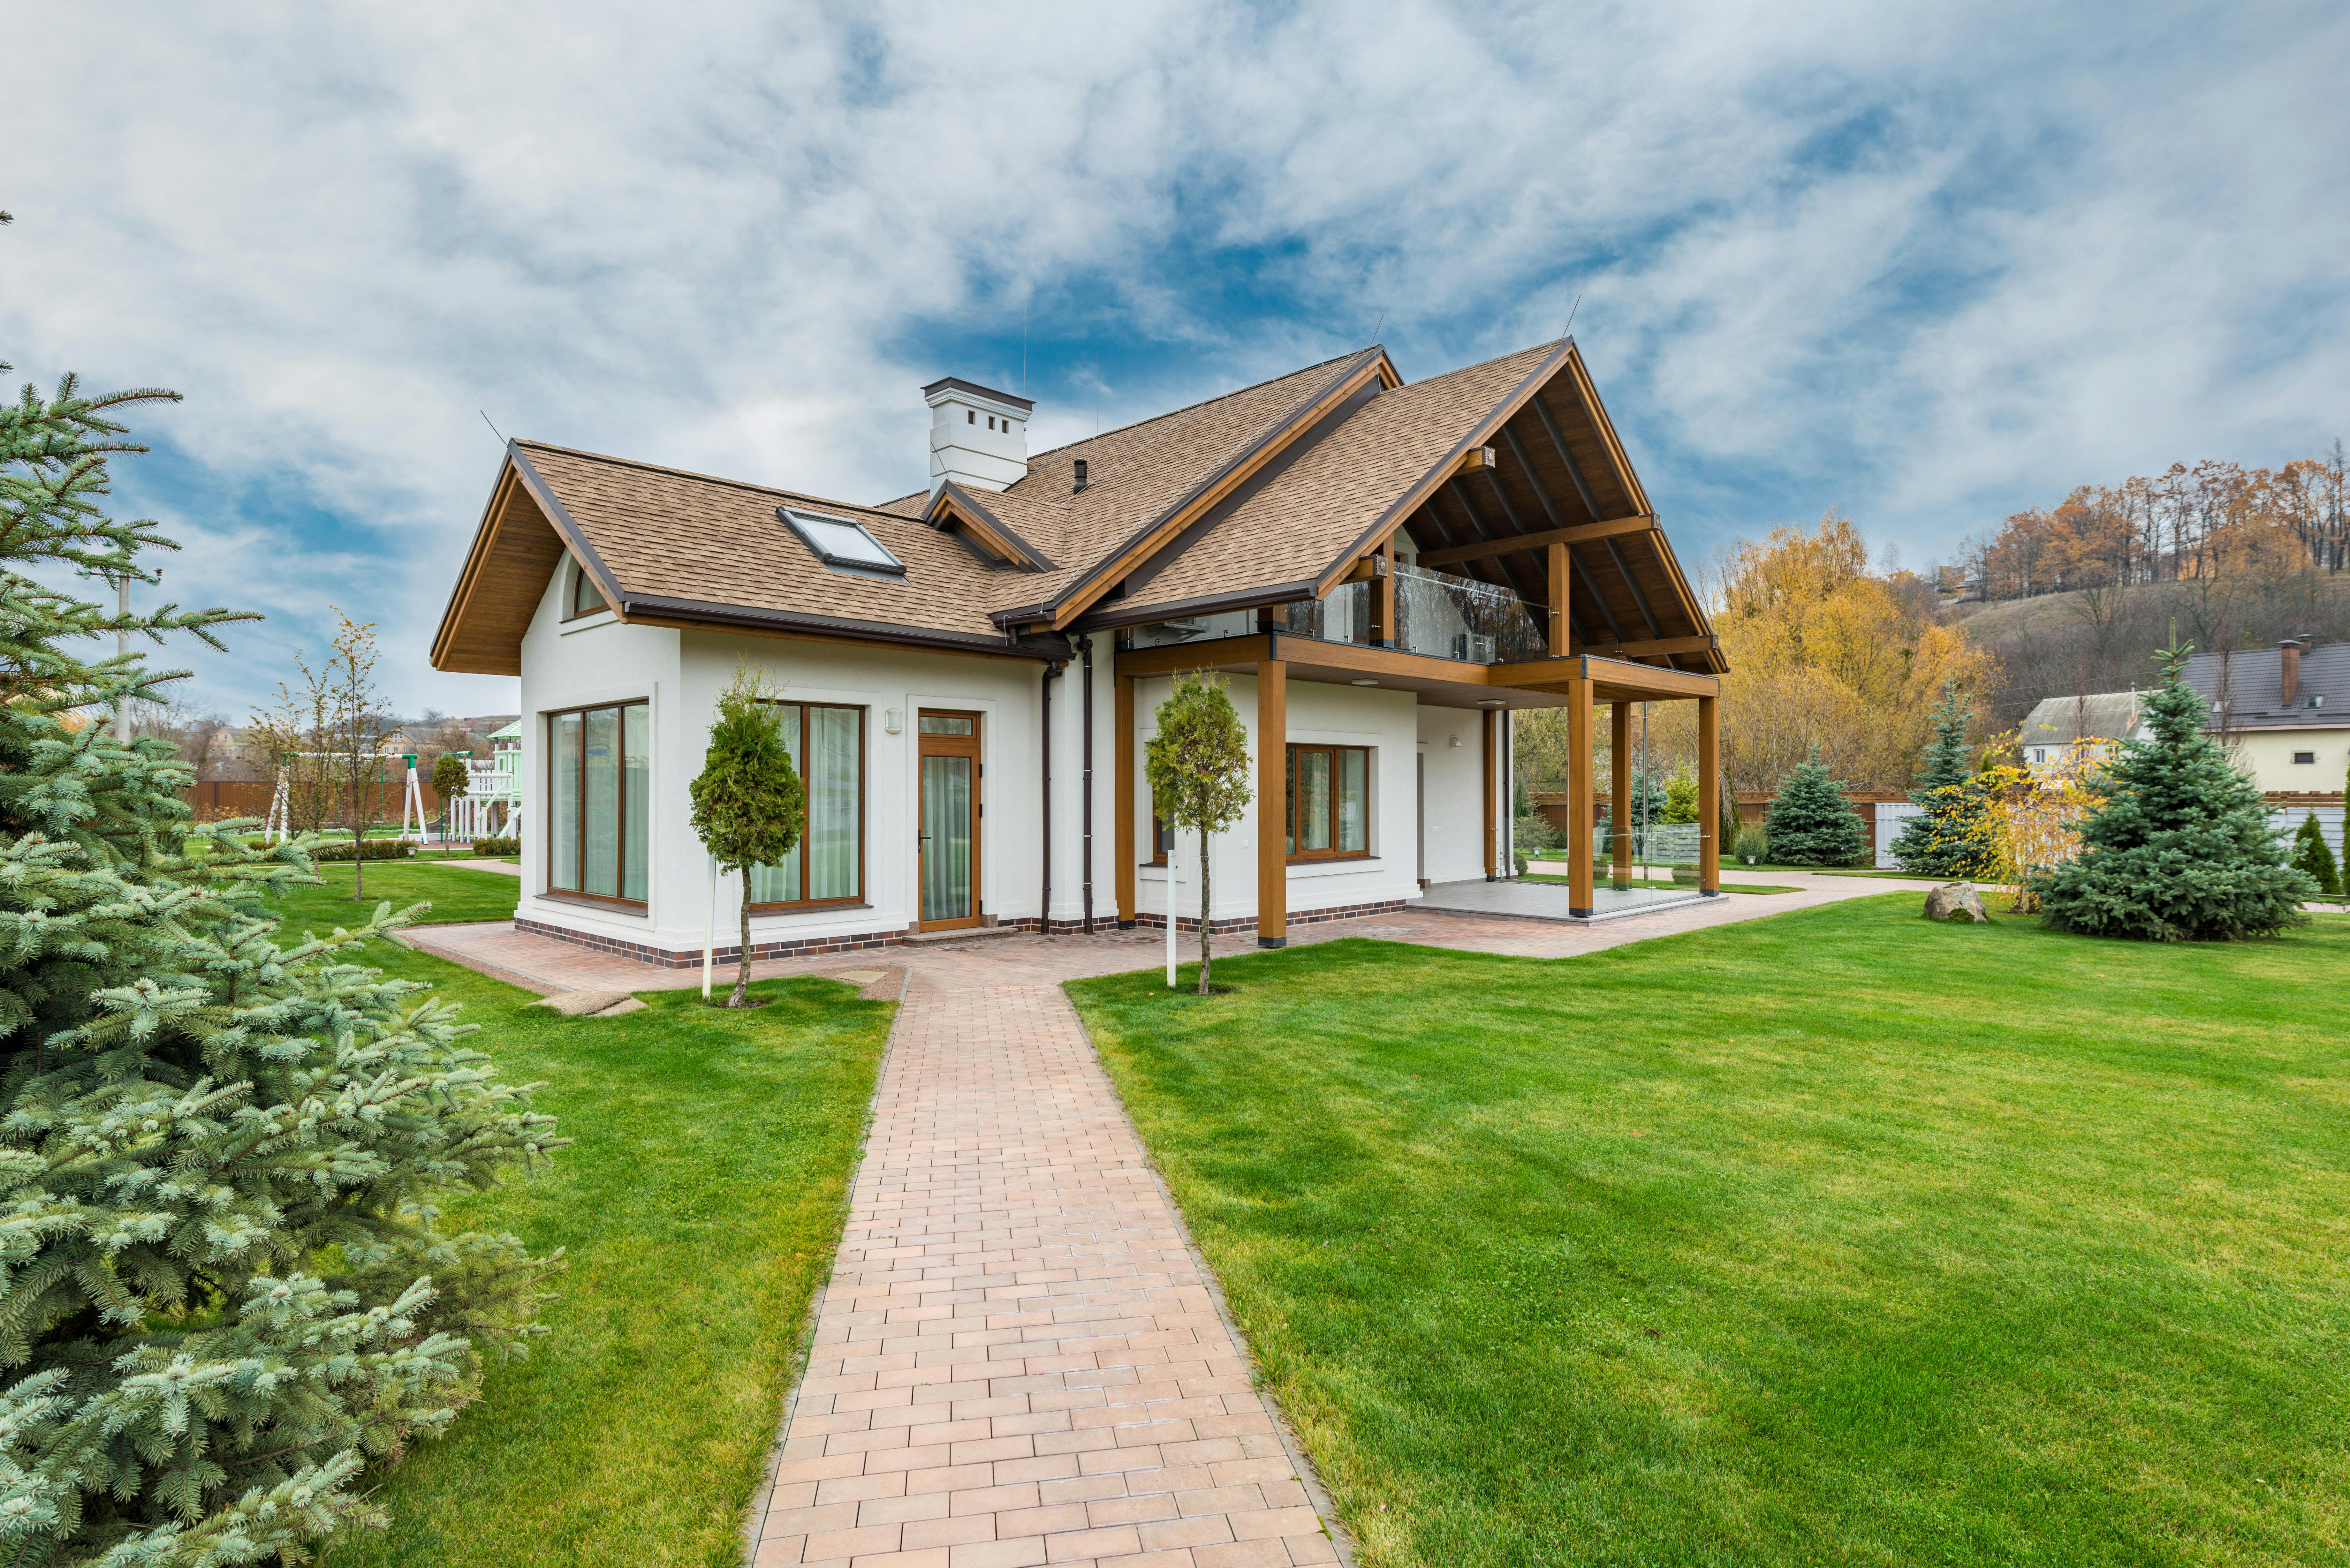 Best Artificial Grass for Homes: What to Consider Before Choosing?